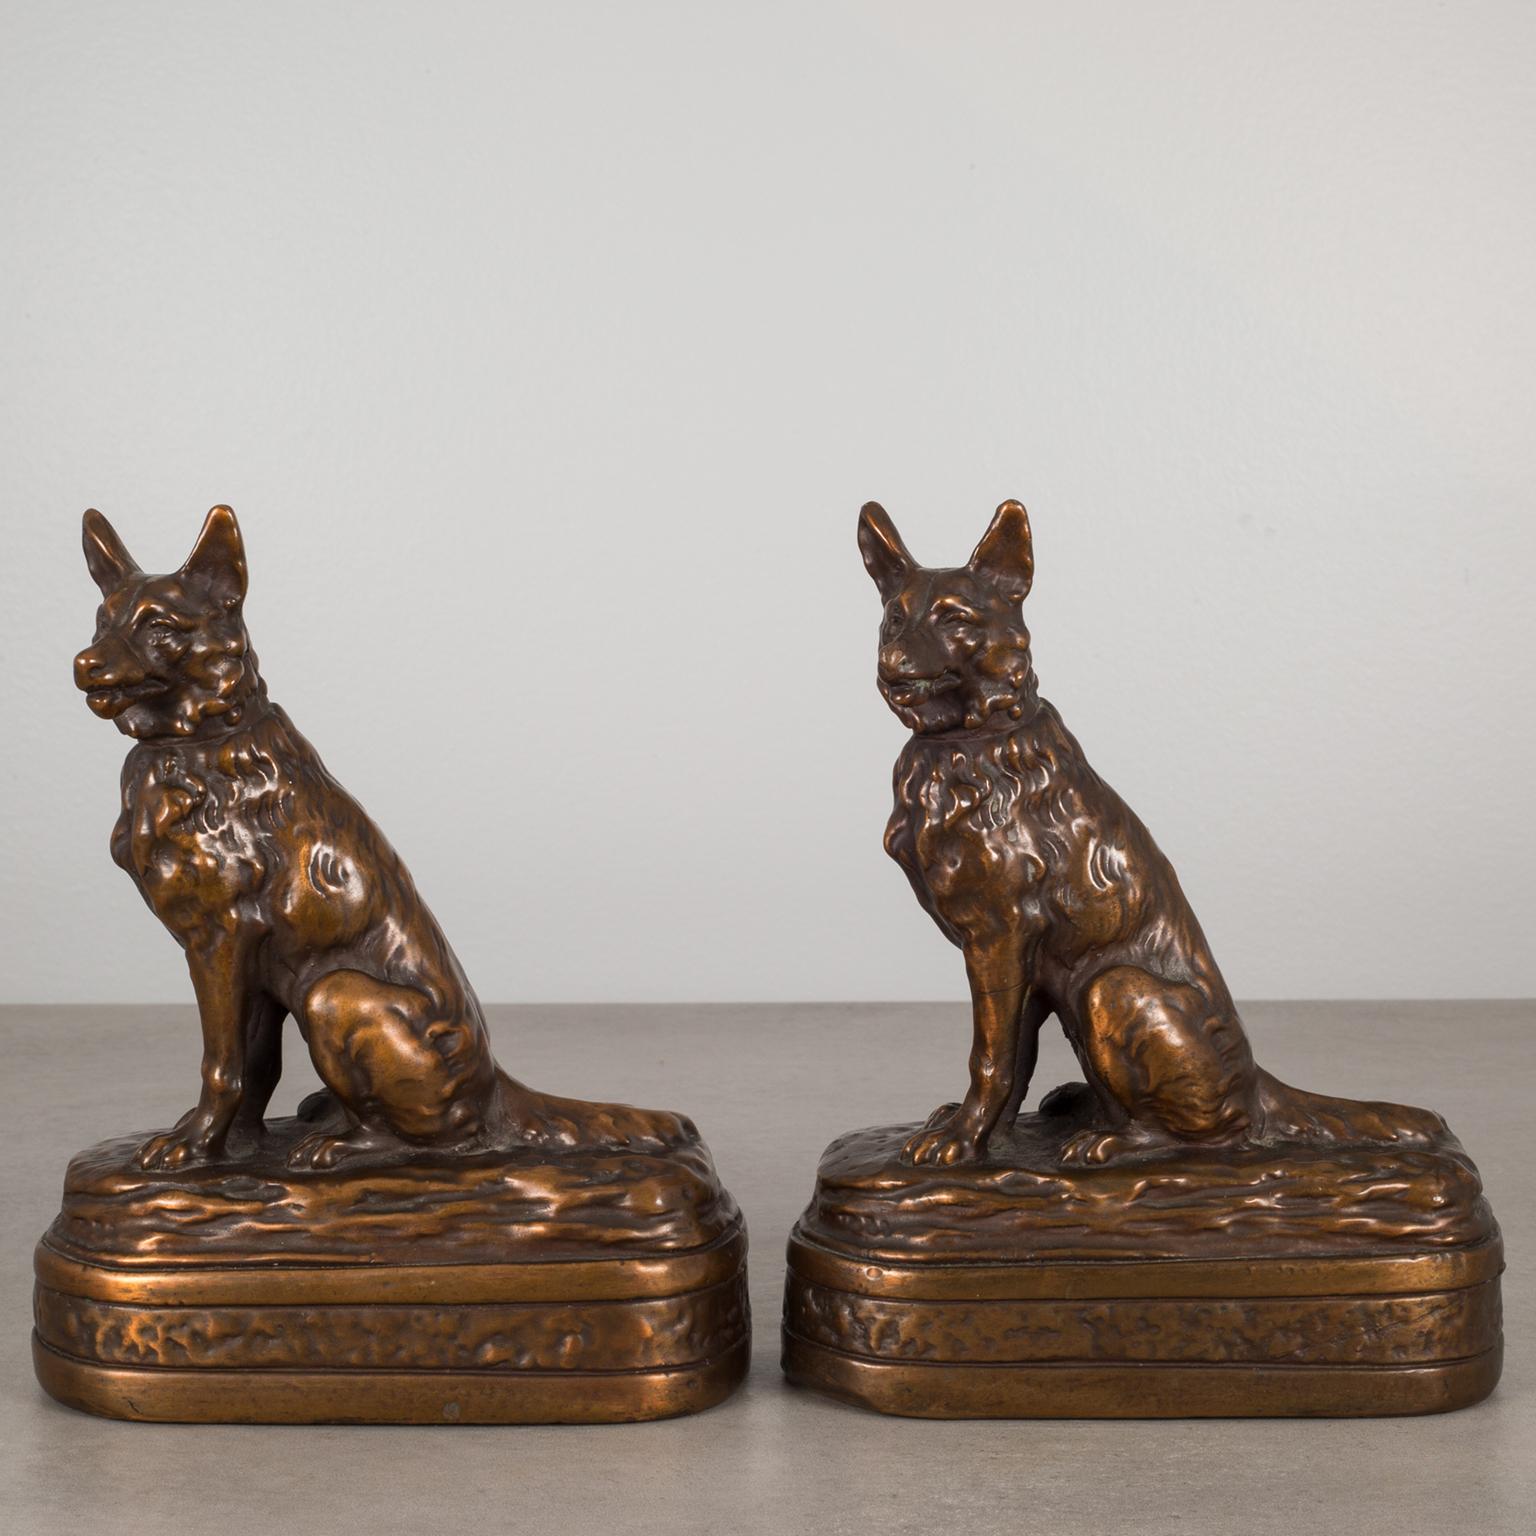 ABOUT

This is an original pair of Art Deco cast bronze German Shepherd  bookends manufactured by Armor Bronze Company, New York USA. Both pieces have retained their original bronze finish and are in excellent condition with appropriate patina for